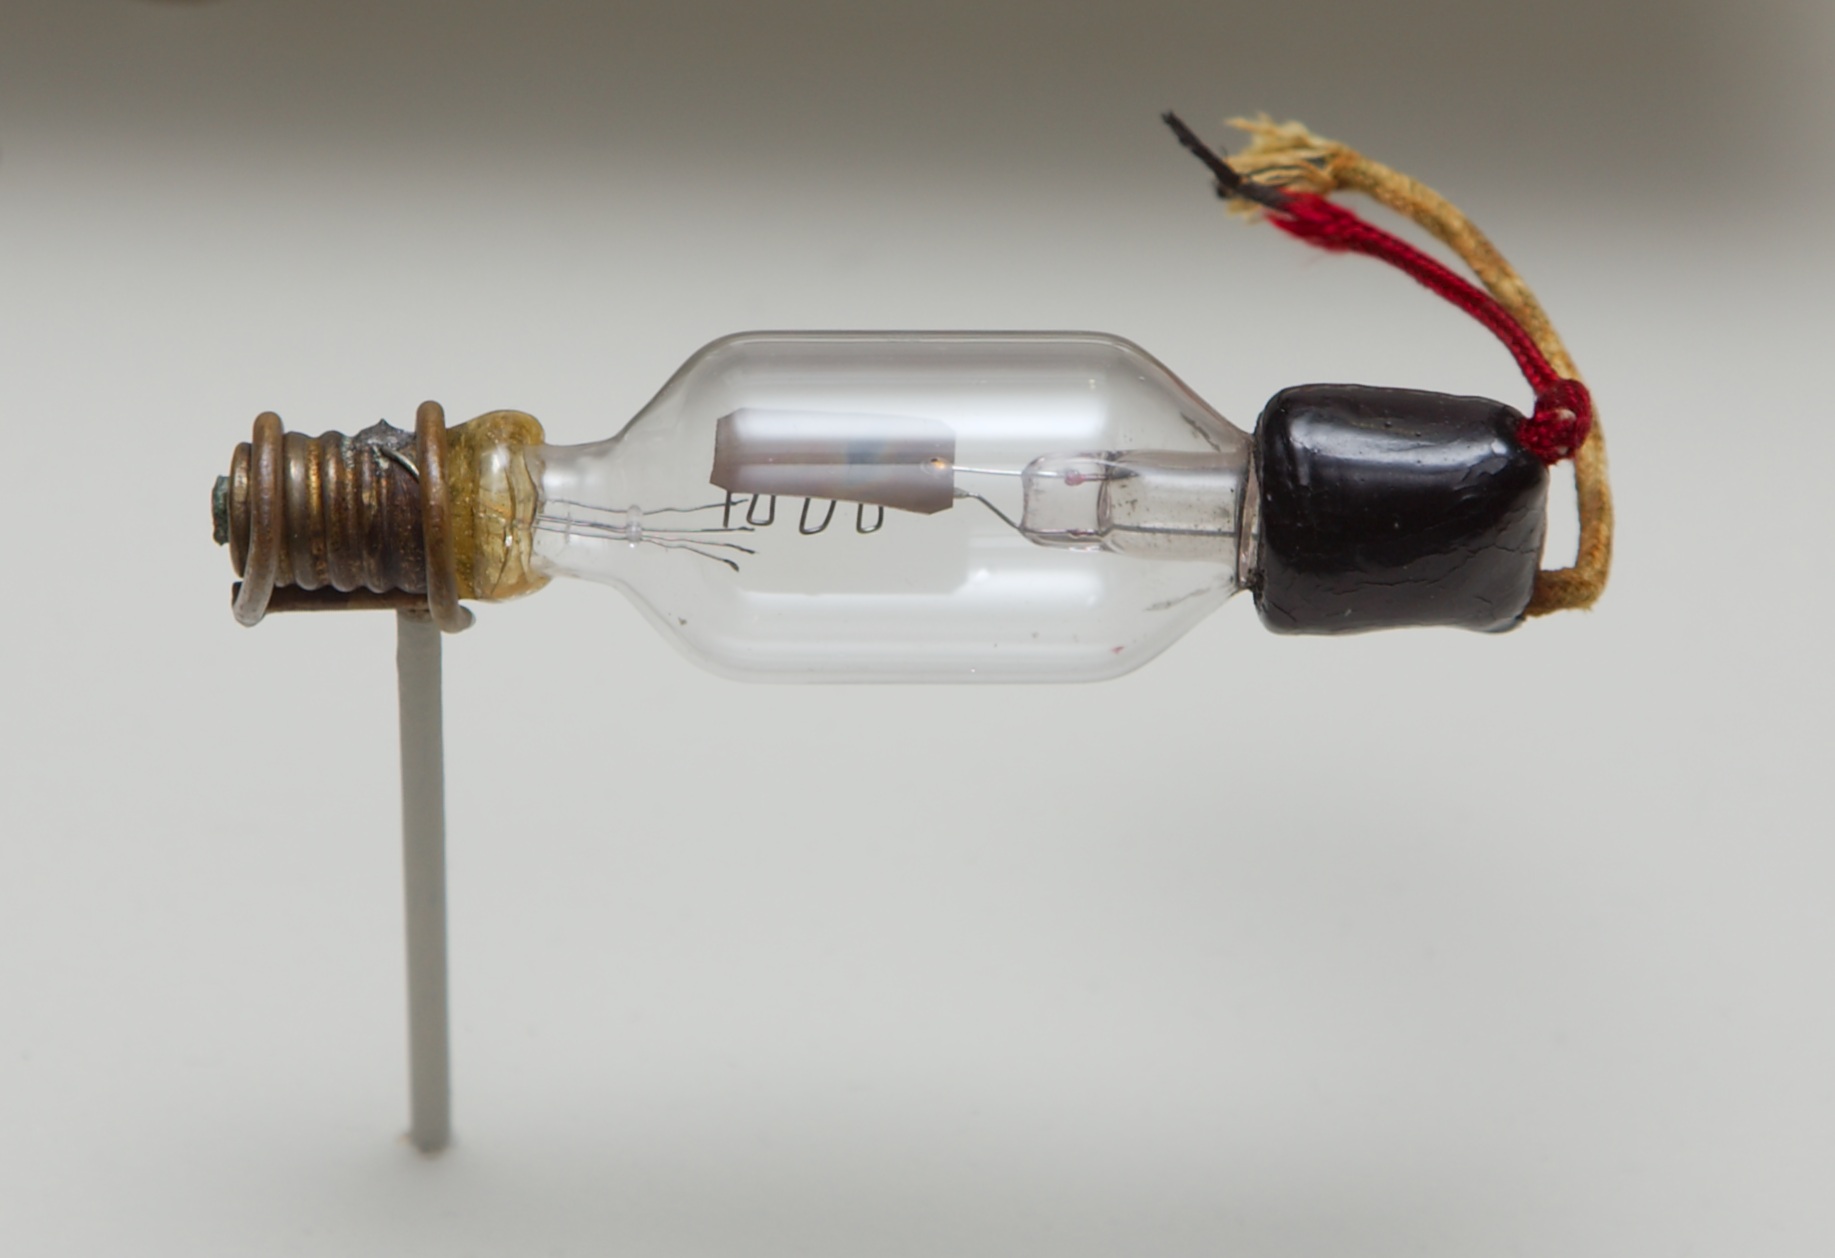 triode tube - Tech History Today